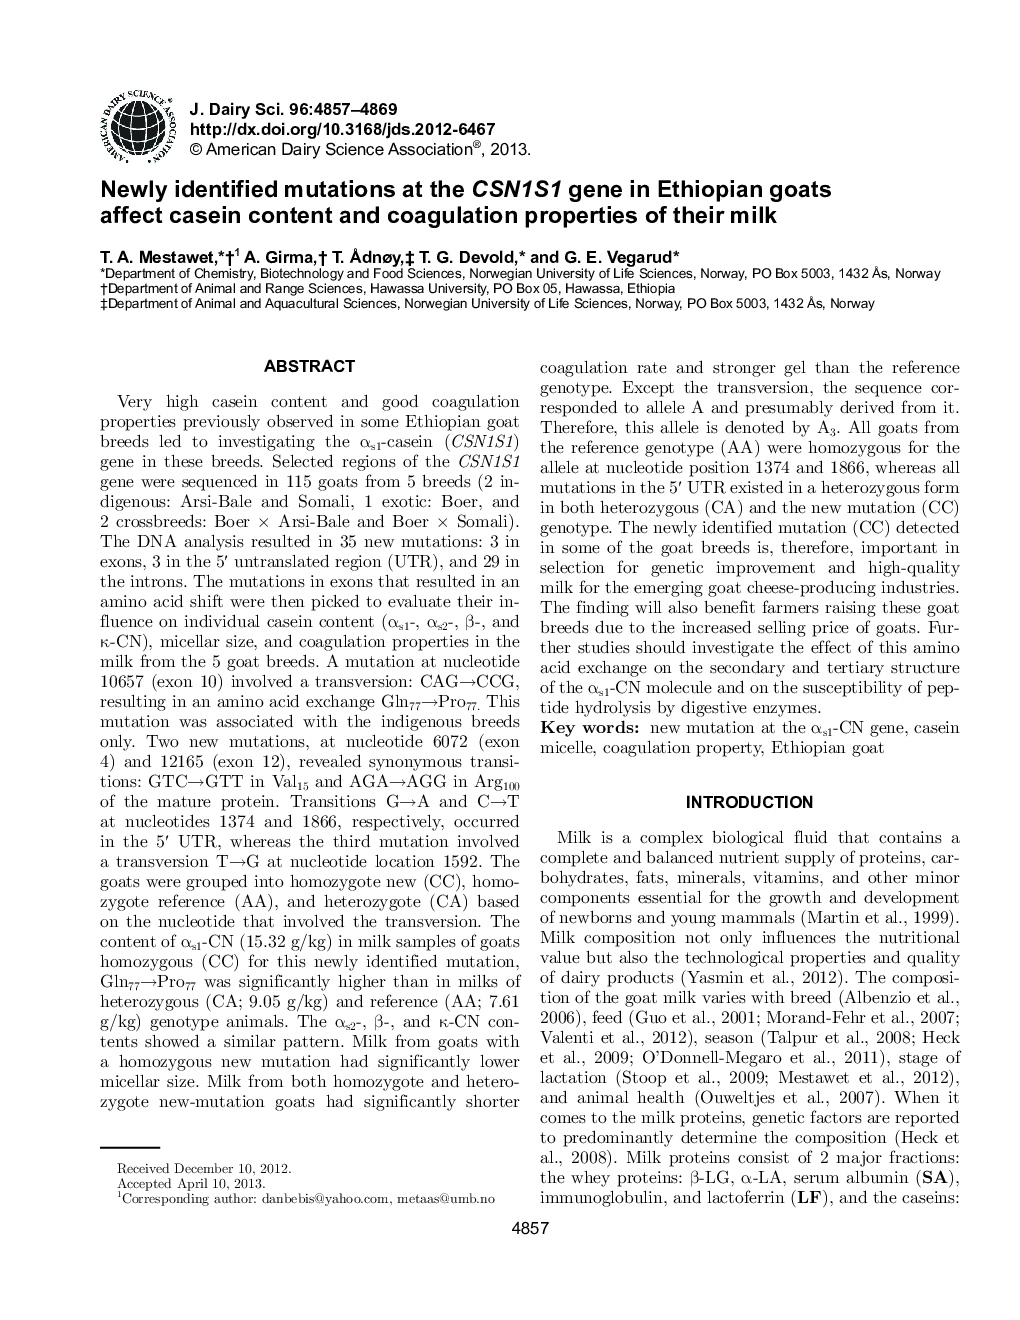 Newly identified mutations at the CSN1S1 gene in Ethiopian goats affect casein content and coagulation properties of their milk